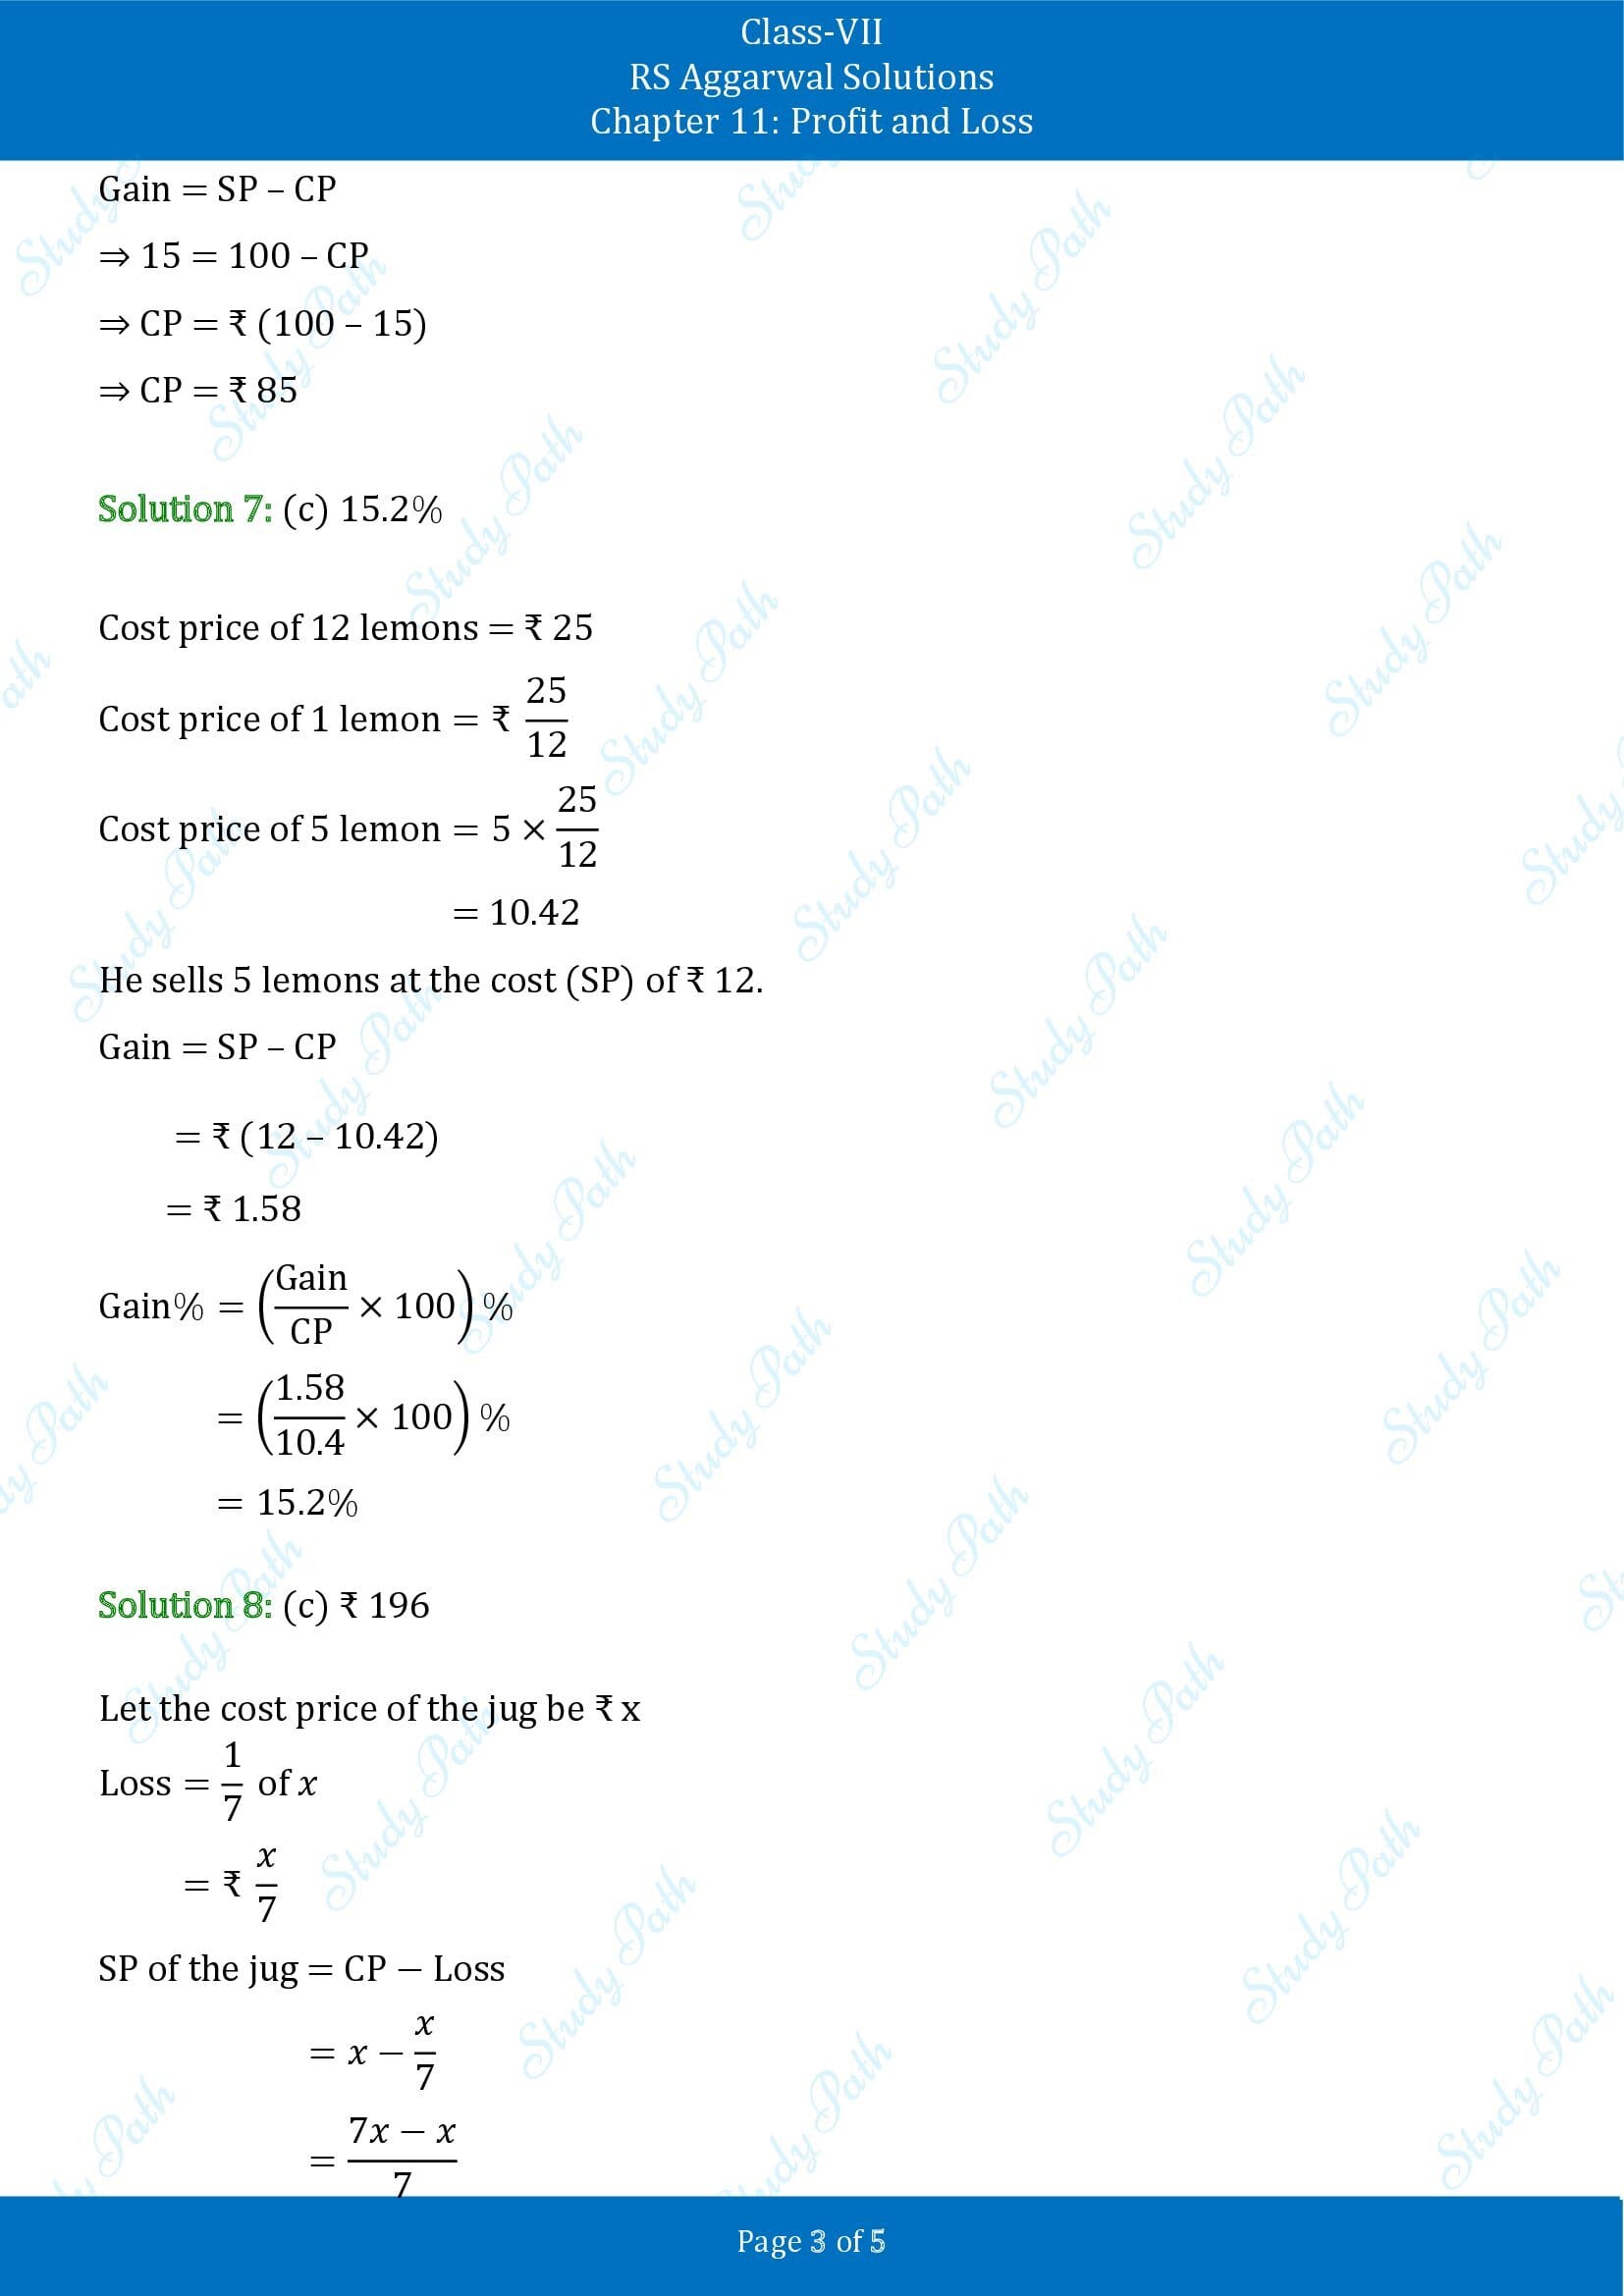 RS Aggarwal Solutions Class 7 Chapter 11 Profit and Loss Test Paper 00003